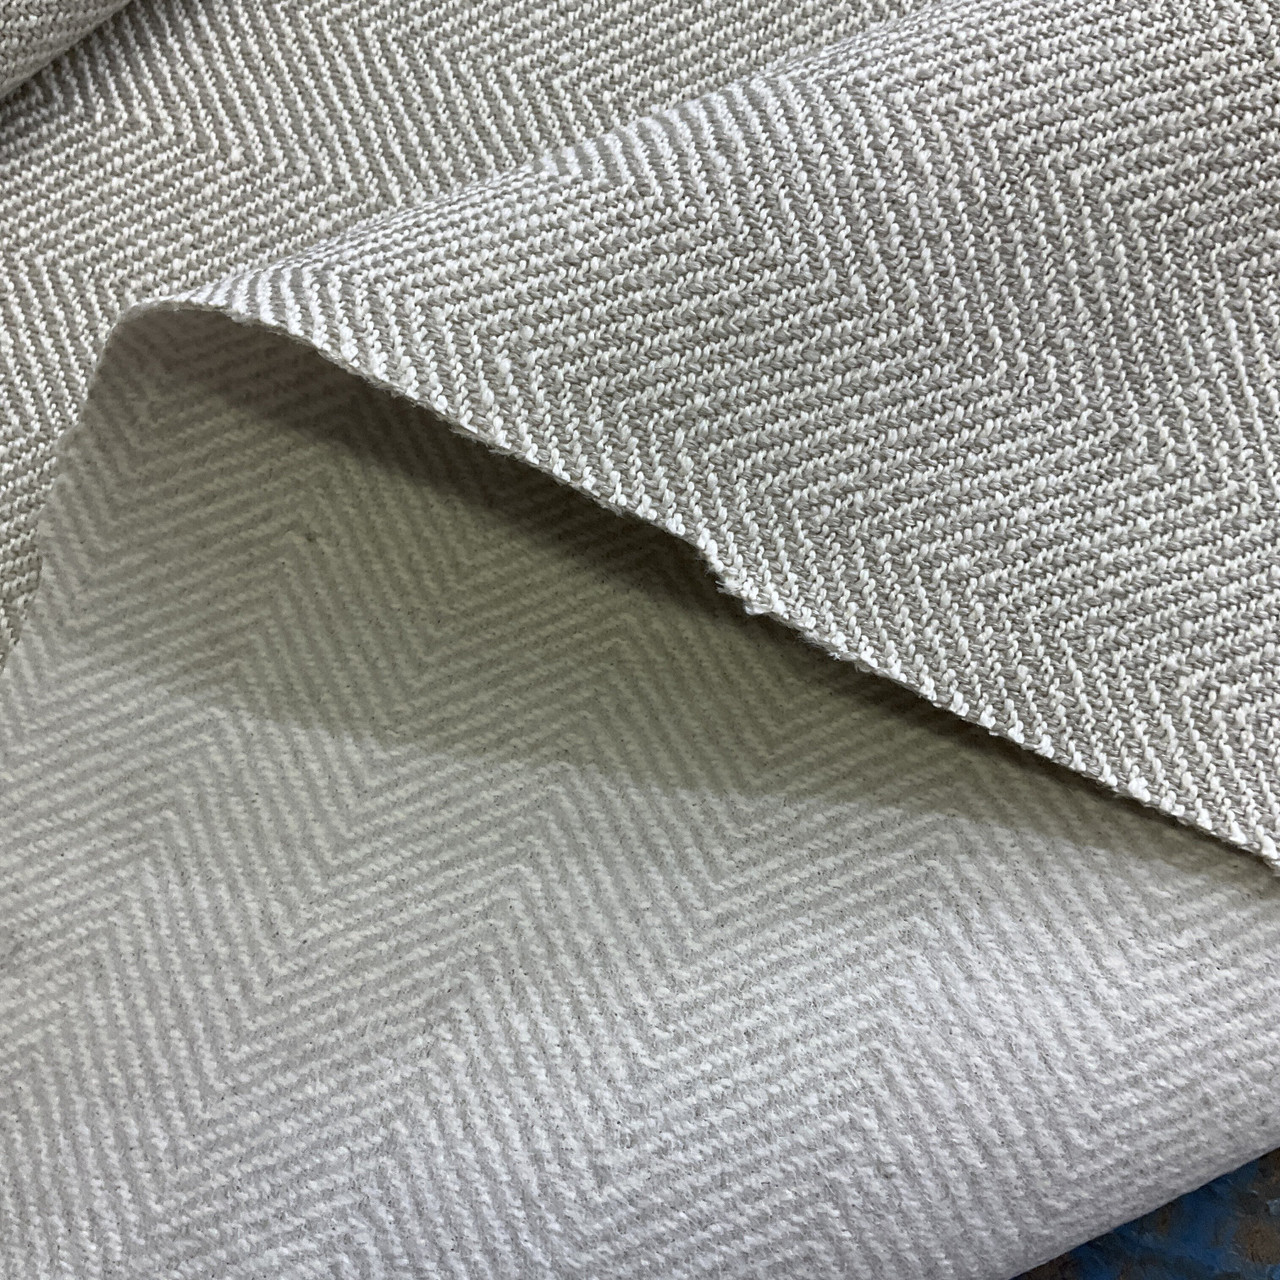 1.13 Yards Baylor Solid Woven Upholstery Fabric in Sandstone